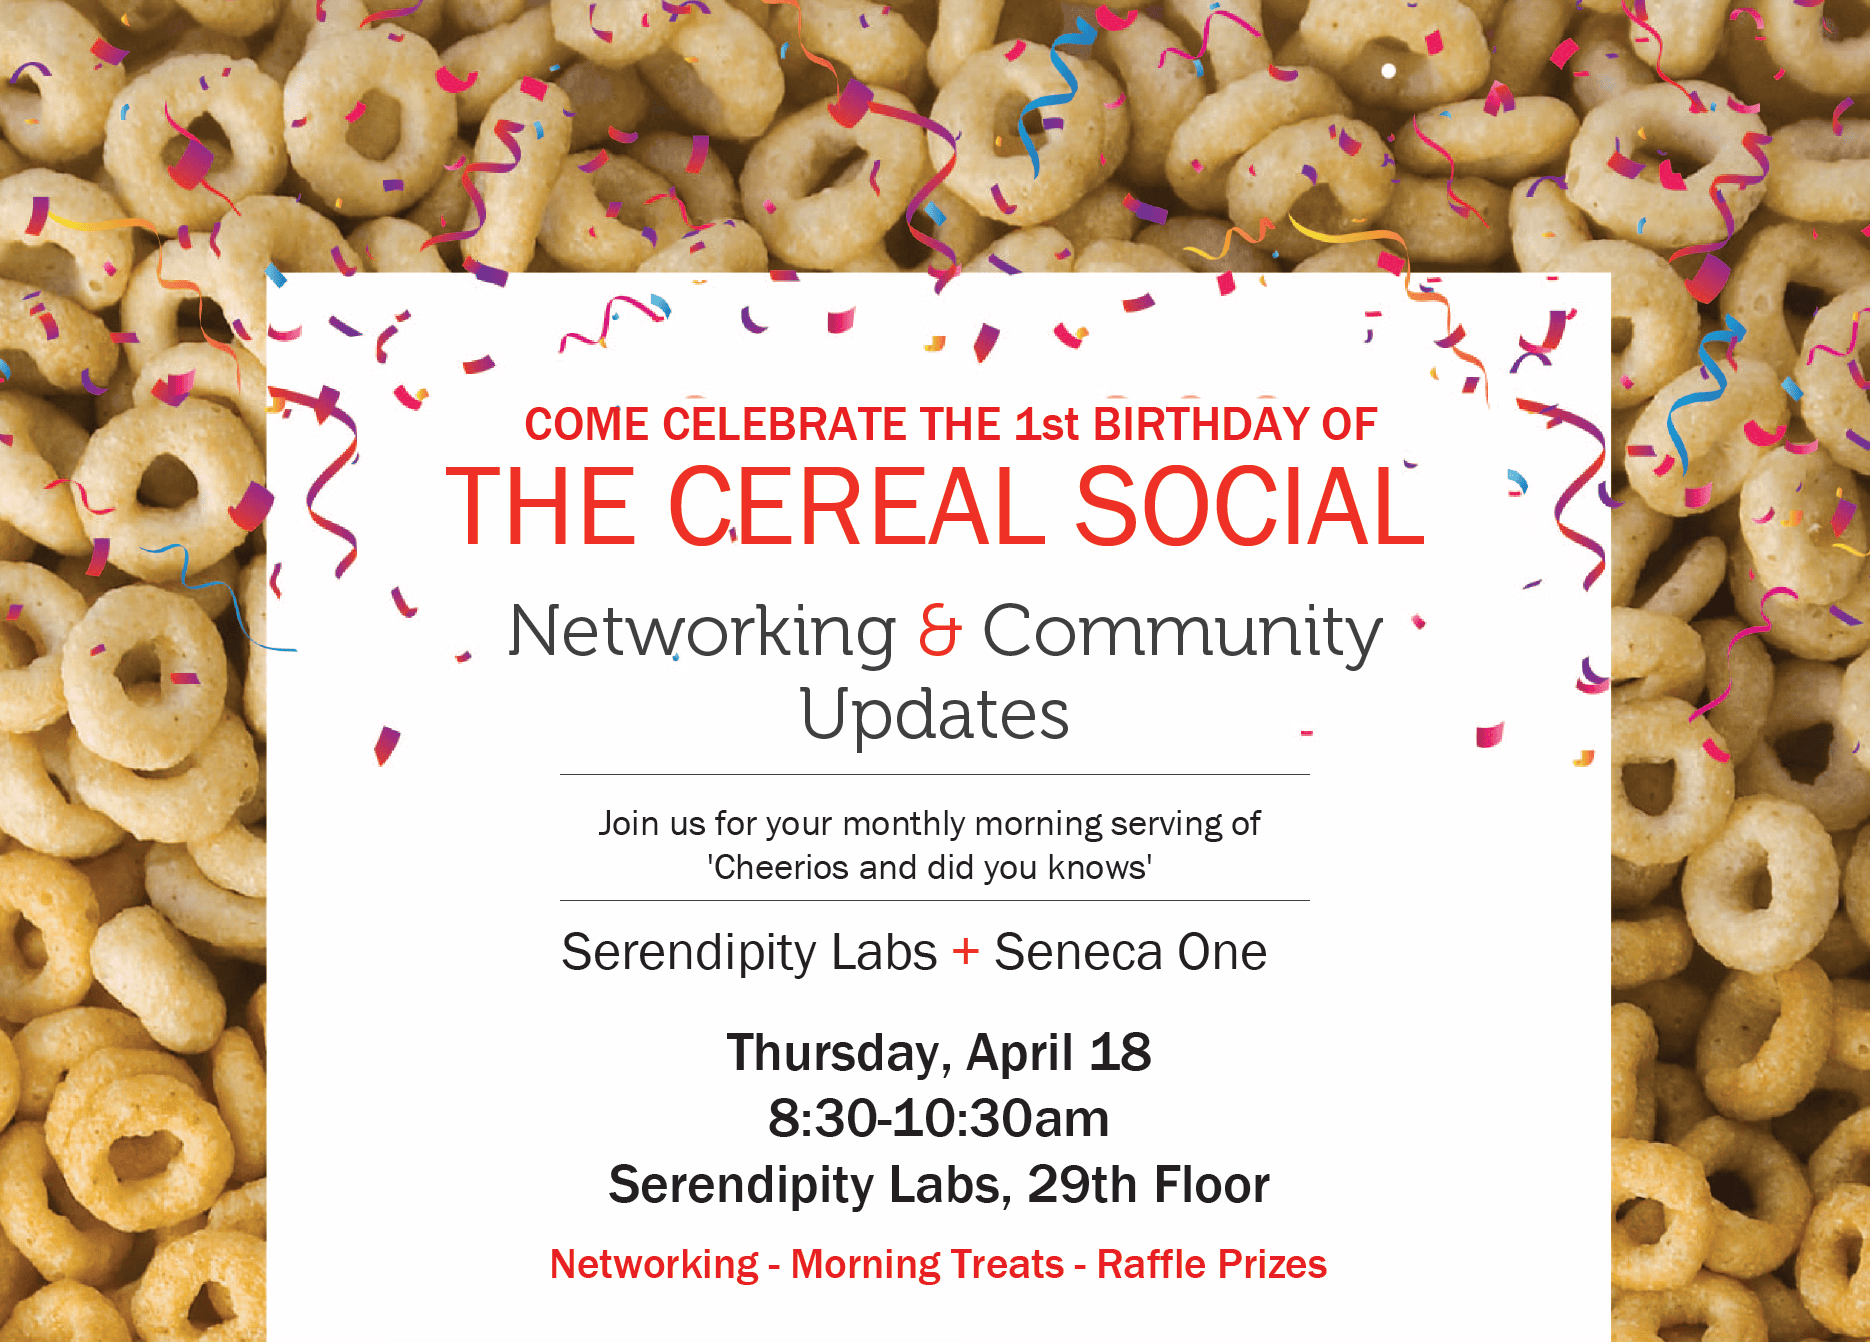 The Cereal Social - First Birthday Celebration!